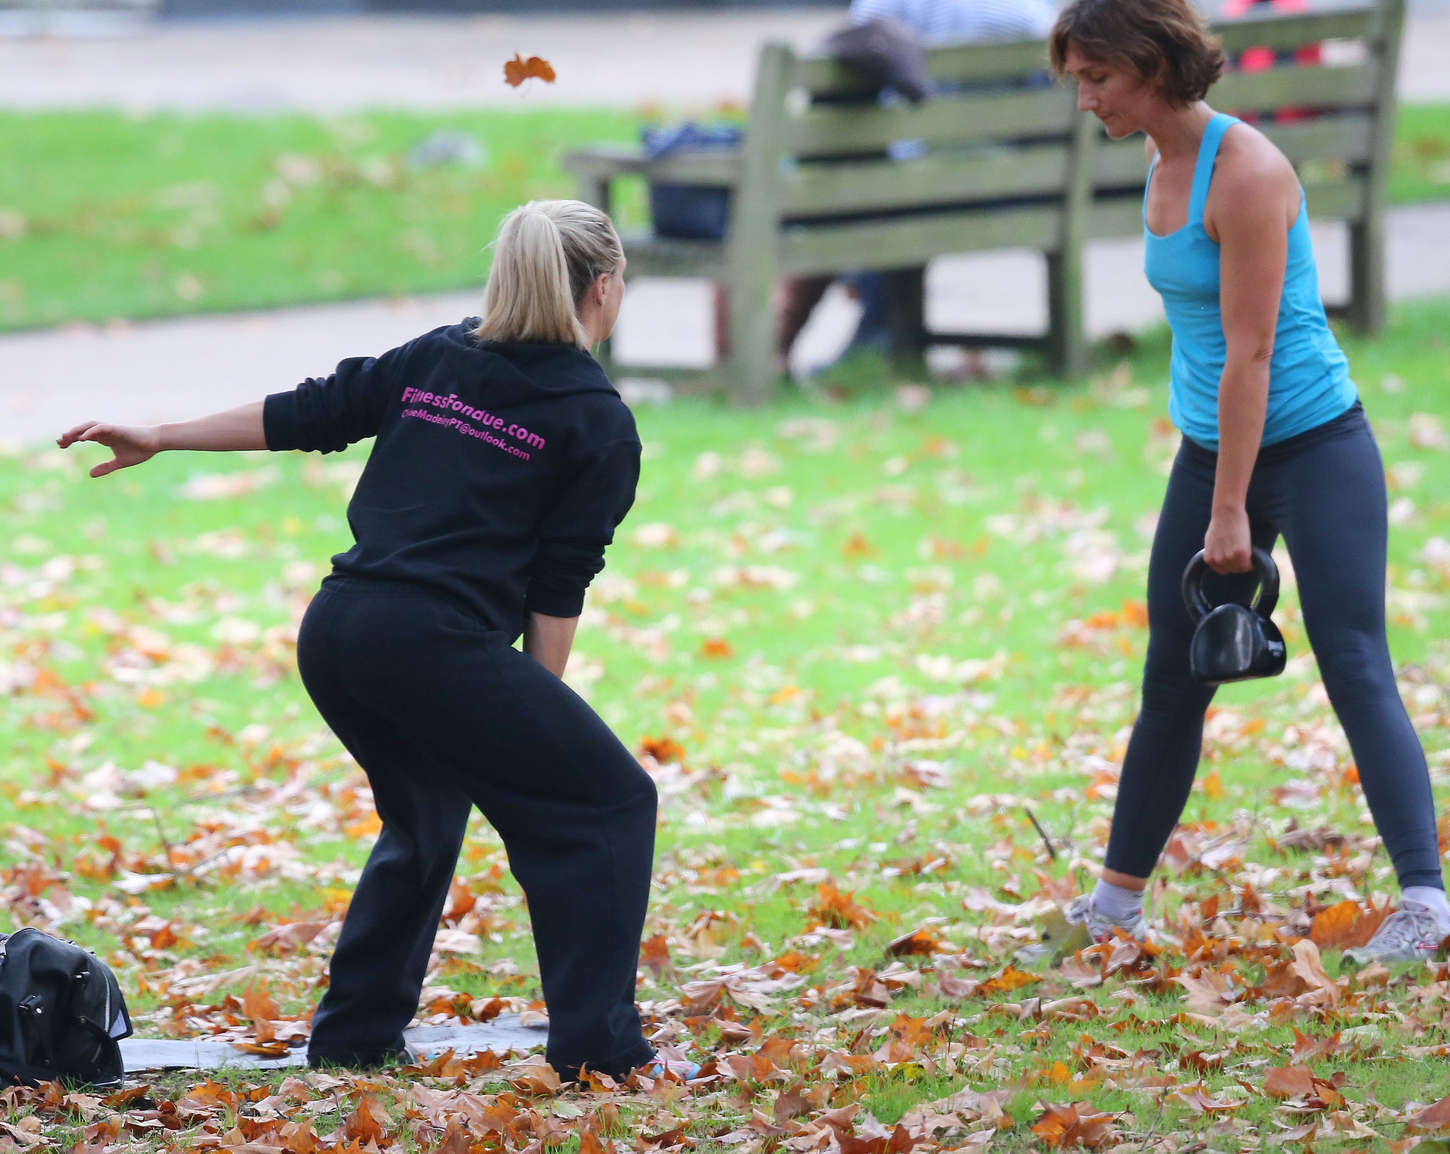 Chloe Madeley Personal trainer workout in a North London Park